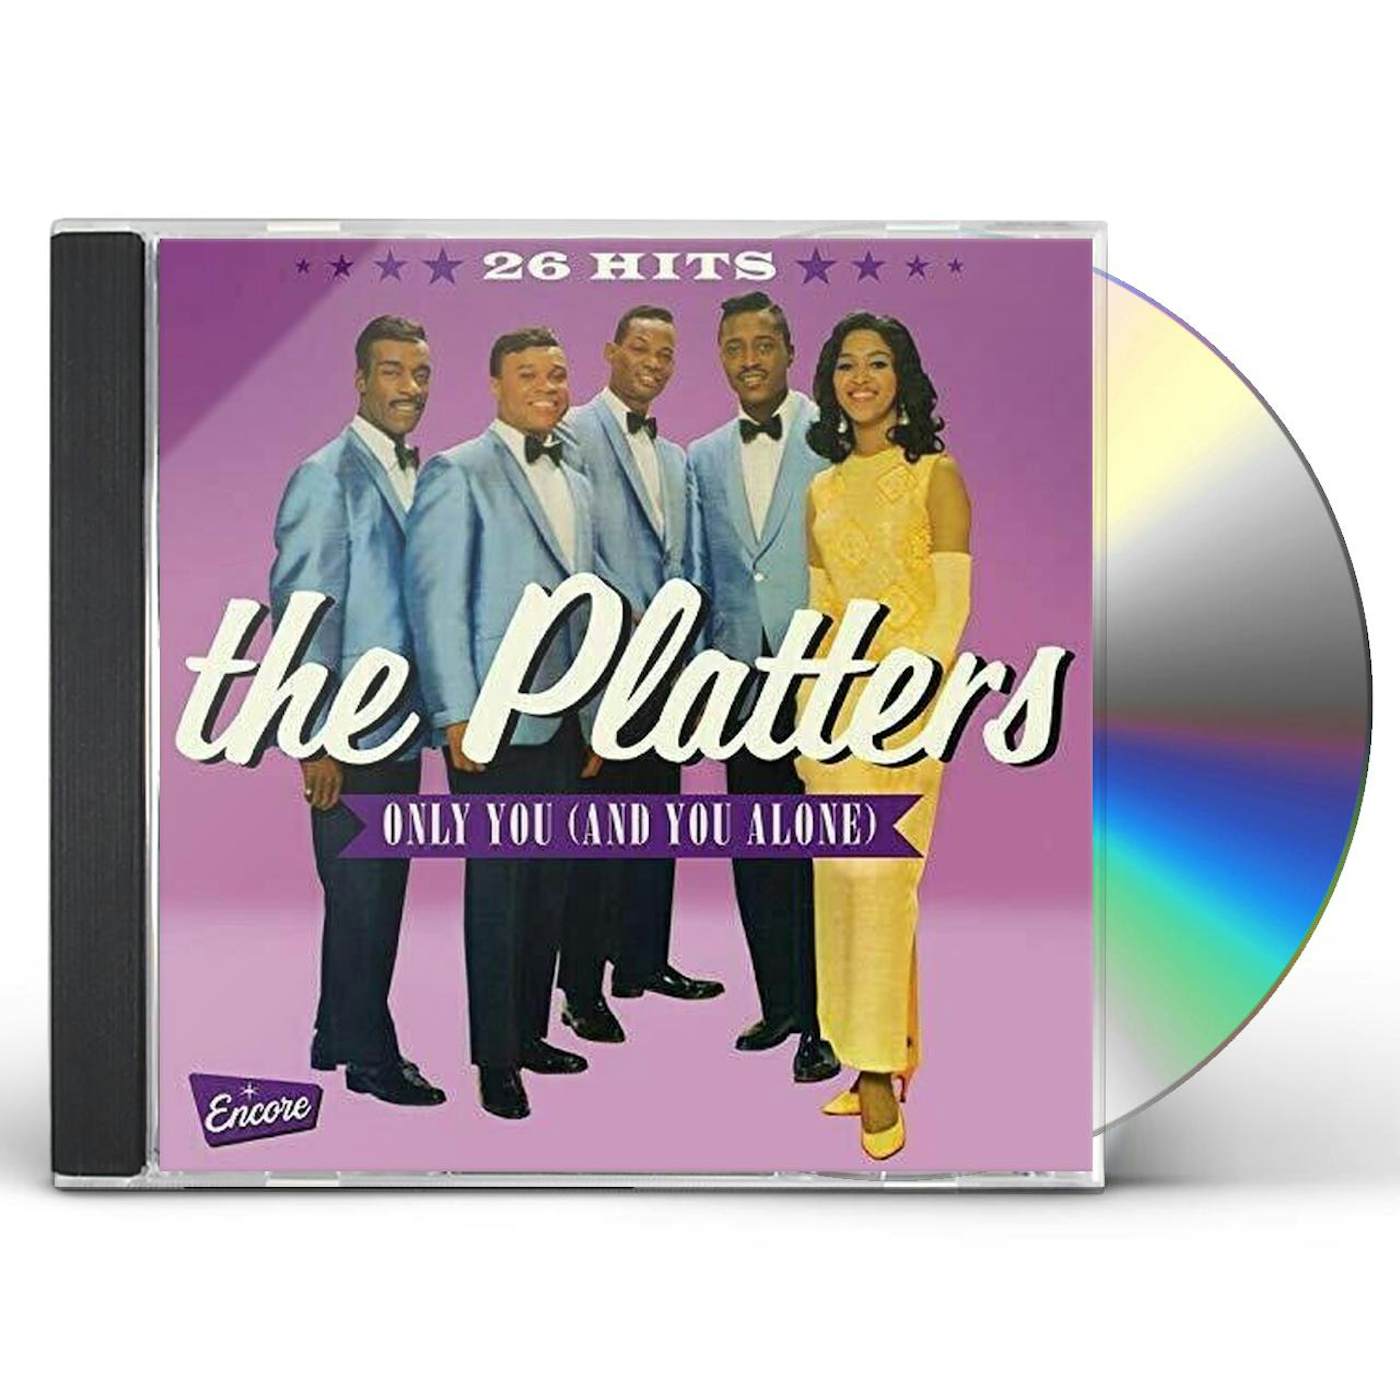 The Platters ONLY YOU (& YOU ALONE) CD